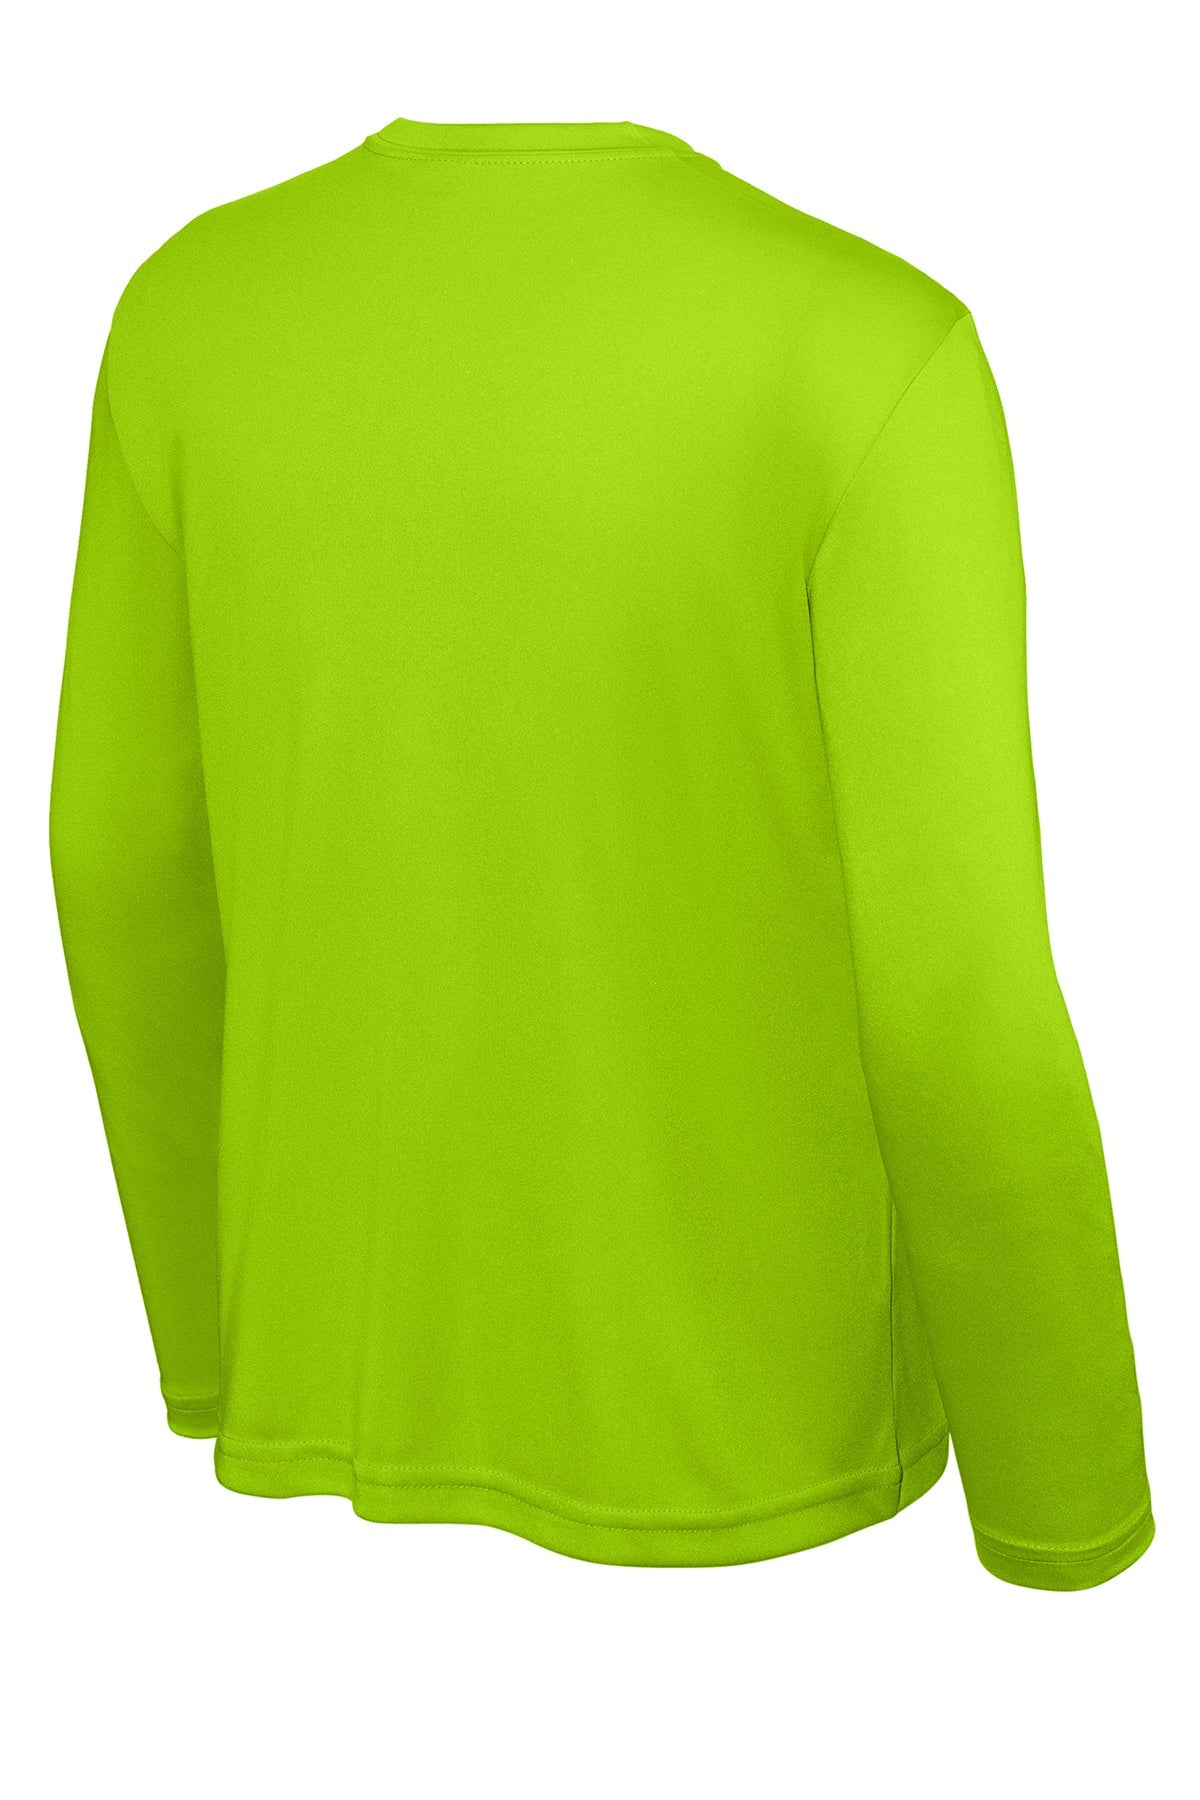 YST350LS Sport-Tek® Youth Long Sleeve PosiCharge® Competitor™ Tee. XS-XL